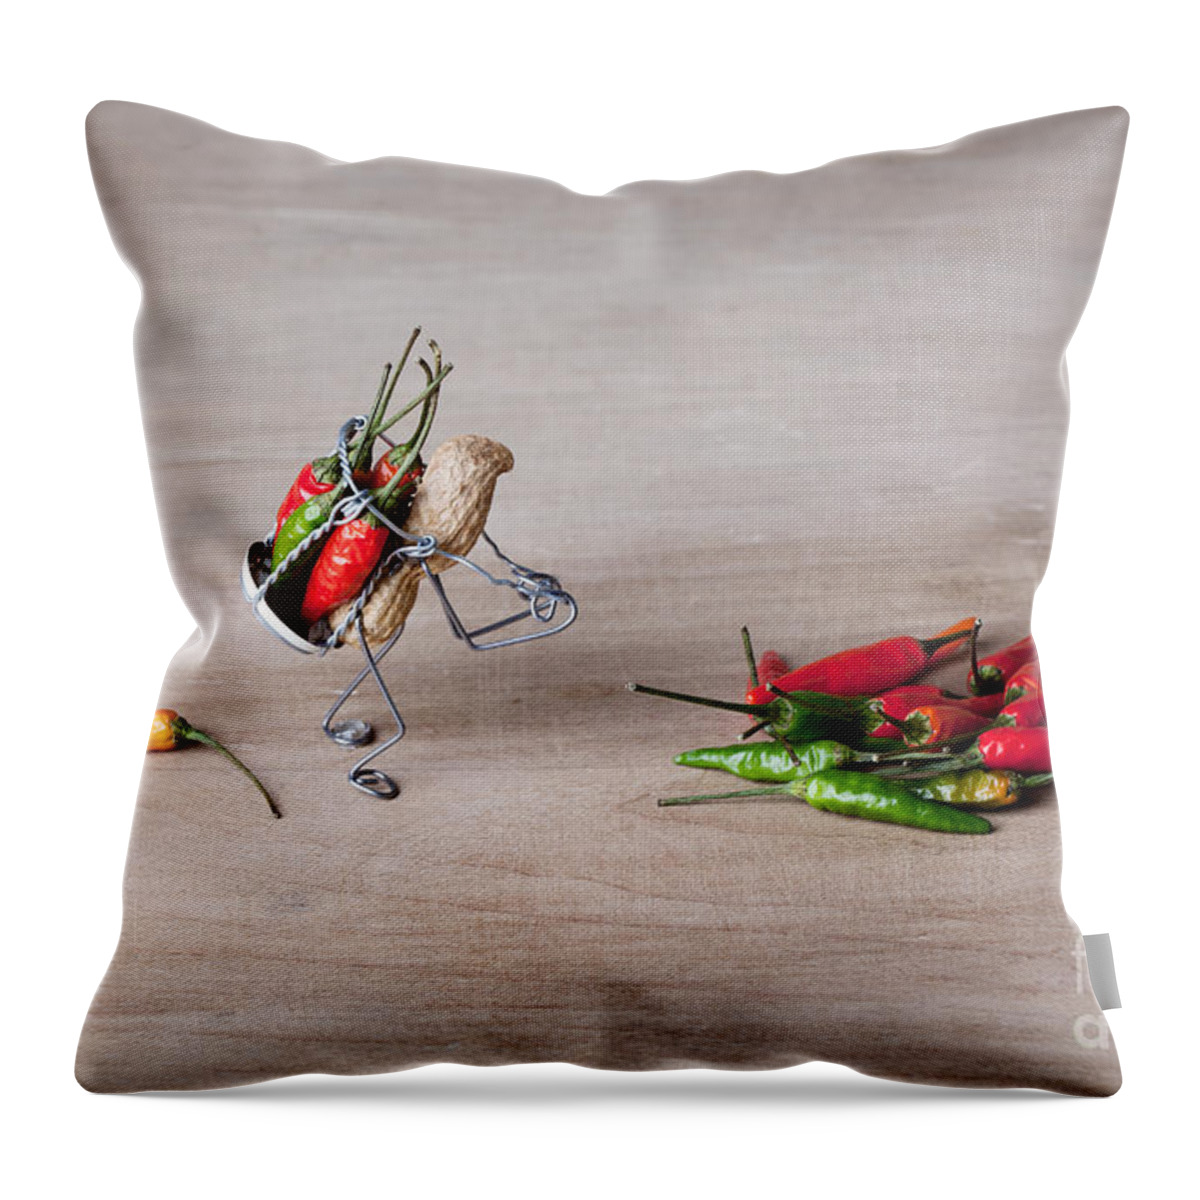 Peanut Throw Pillow featuring the photograph Hot Delivery 02 by Nailia Schwarz